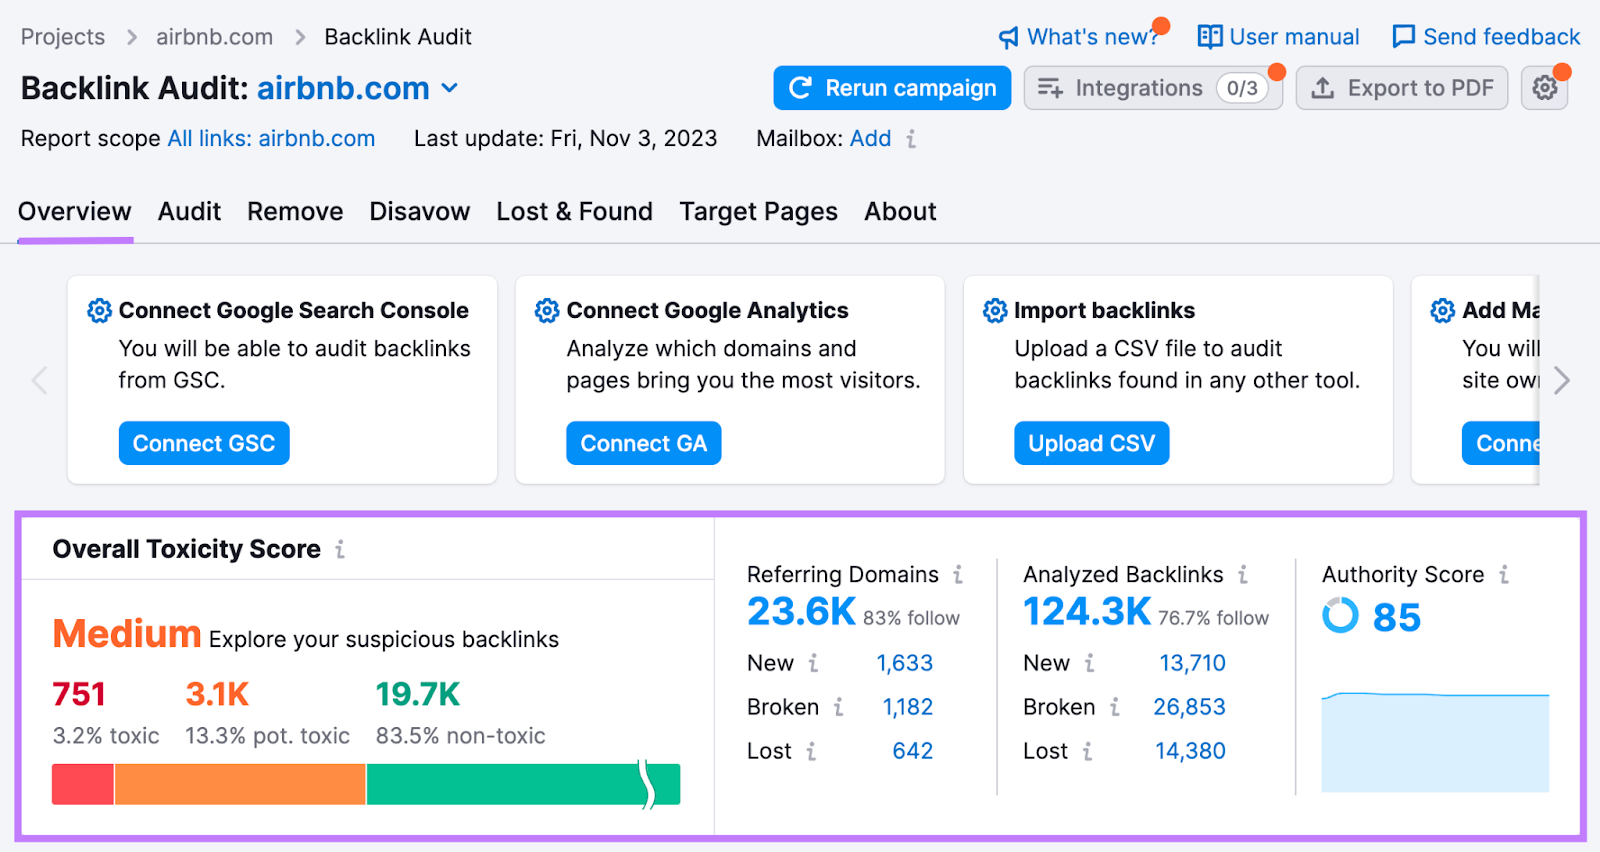 "Overall Toxicity Score" section highlighted in the Backlink Audit overview report